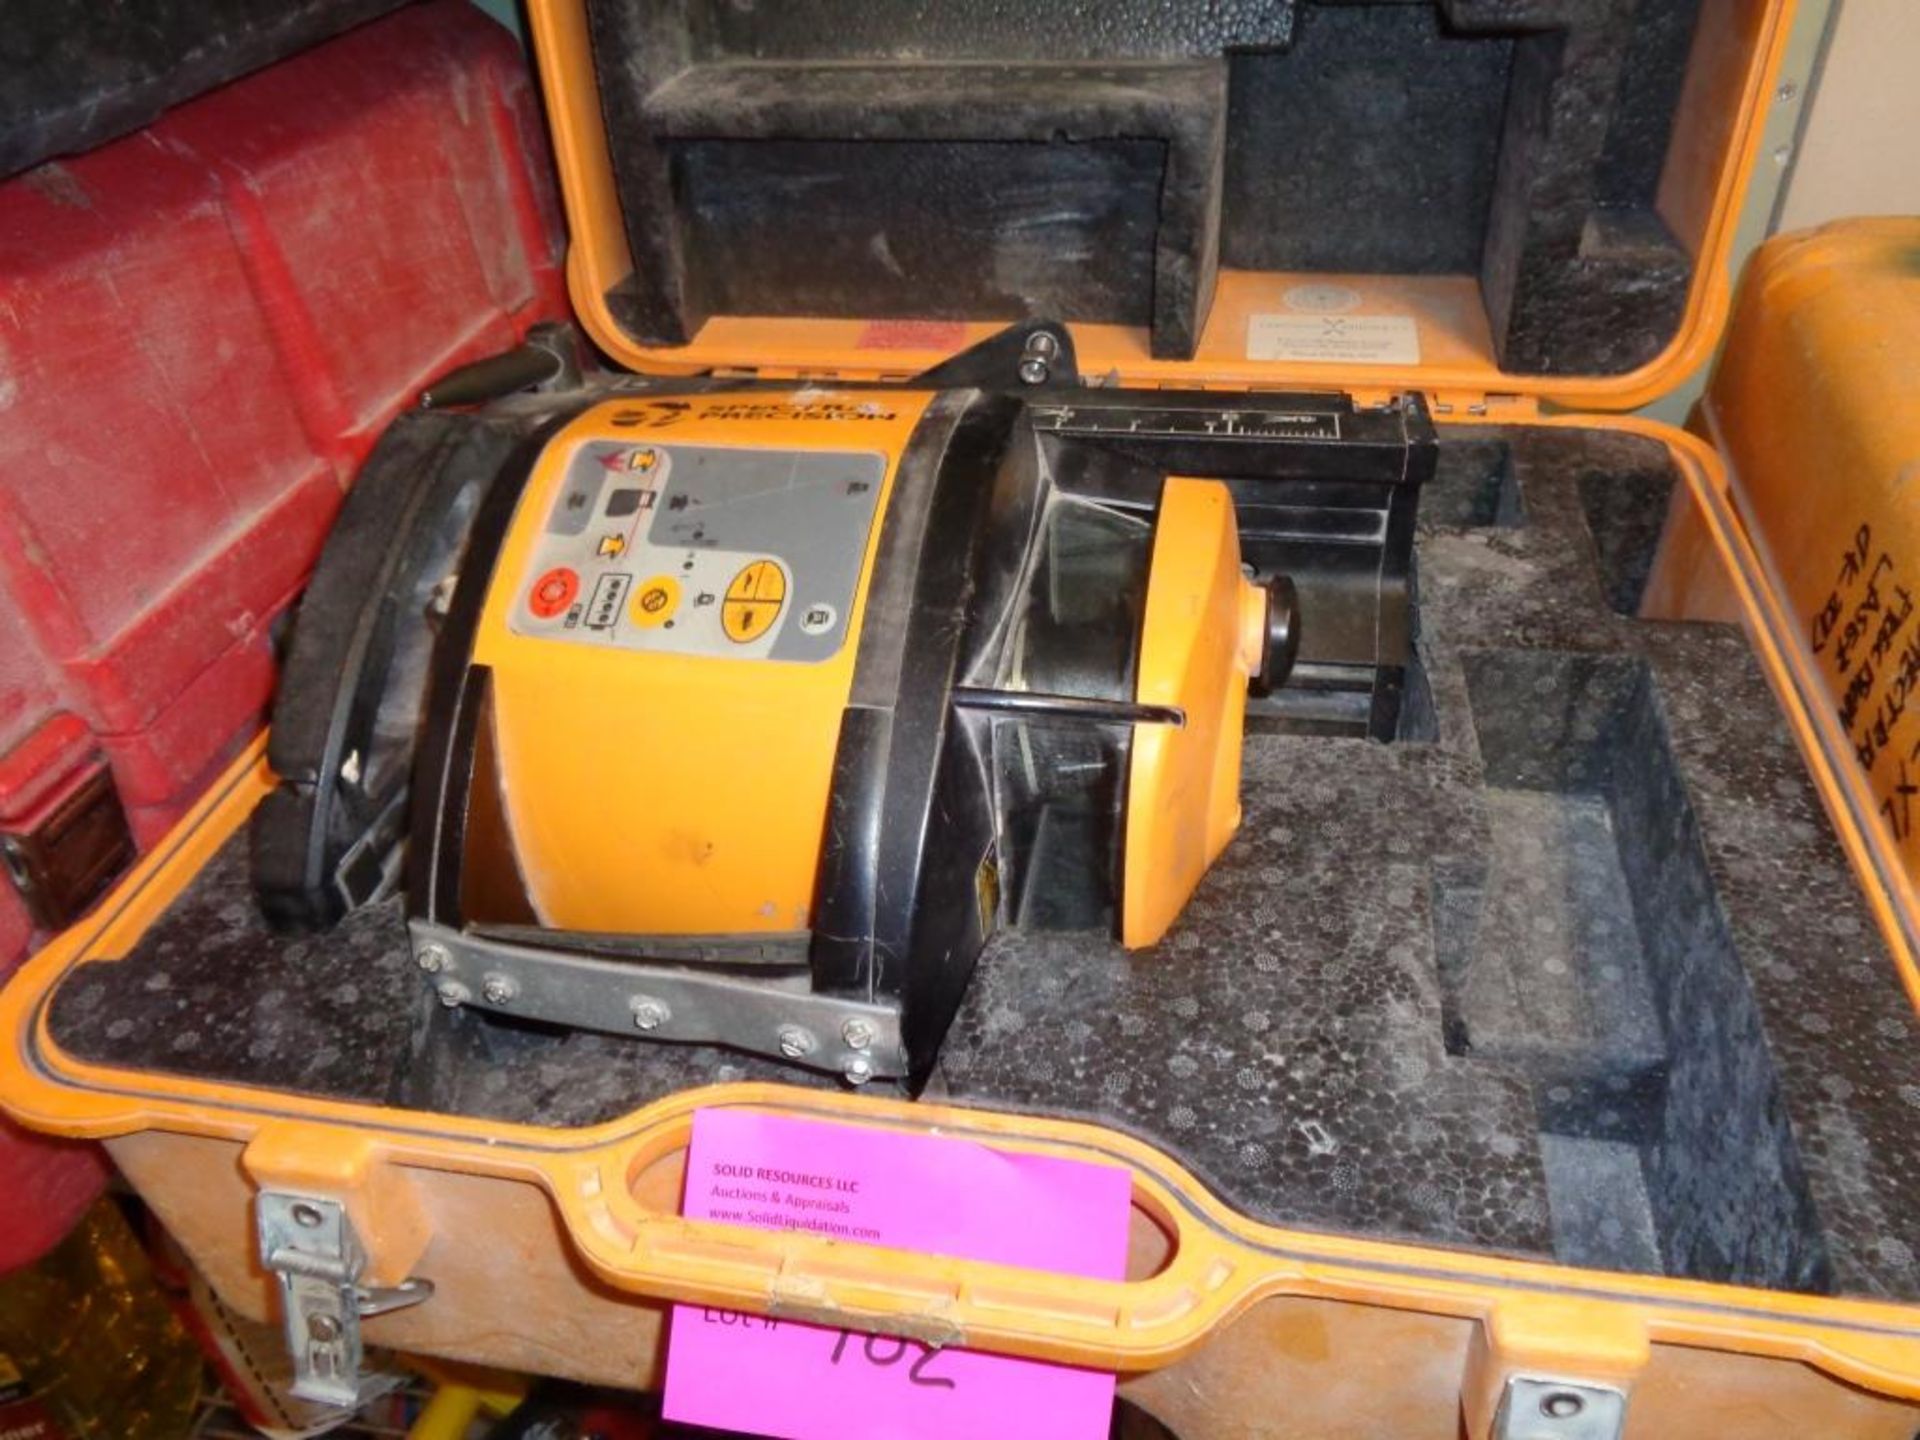 SPECTRA PRECISION LASER LEVEL MODEL 1470HP, WITH REMOTE, IN CASE